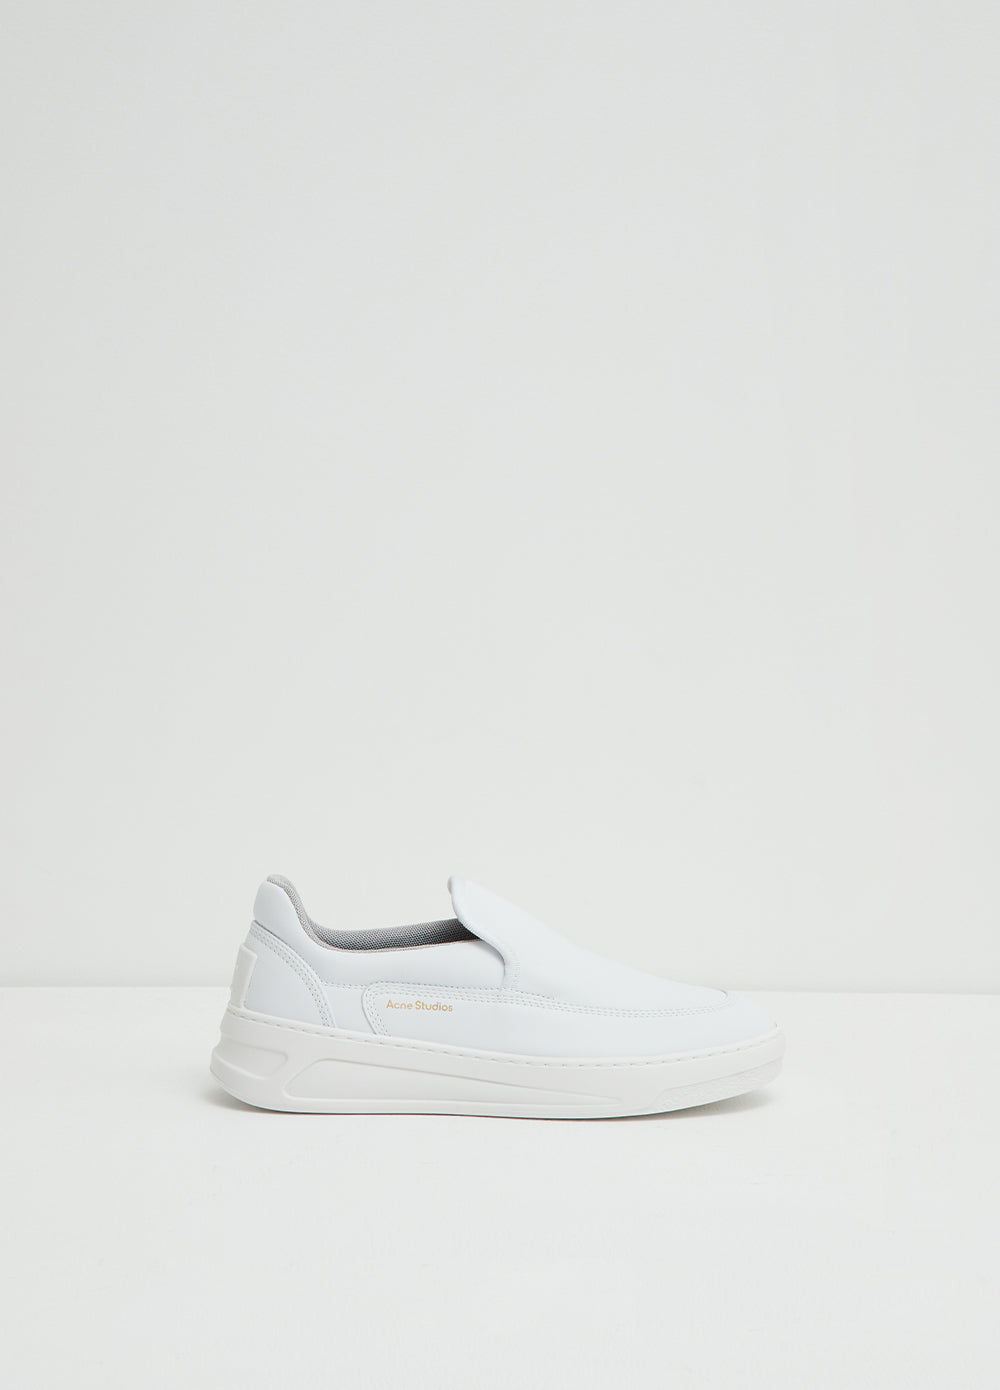 Face Slip-on Sneakers